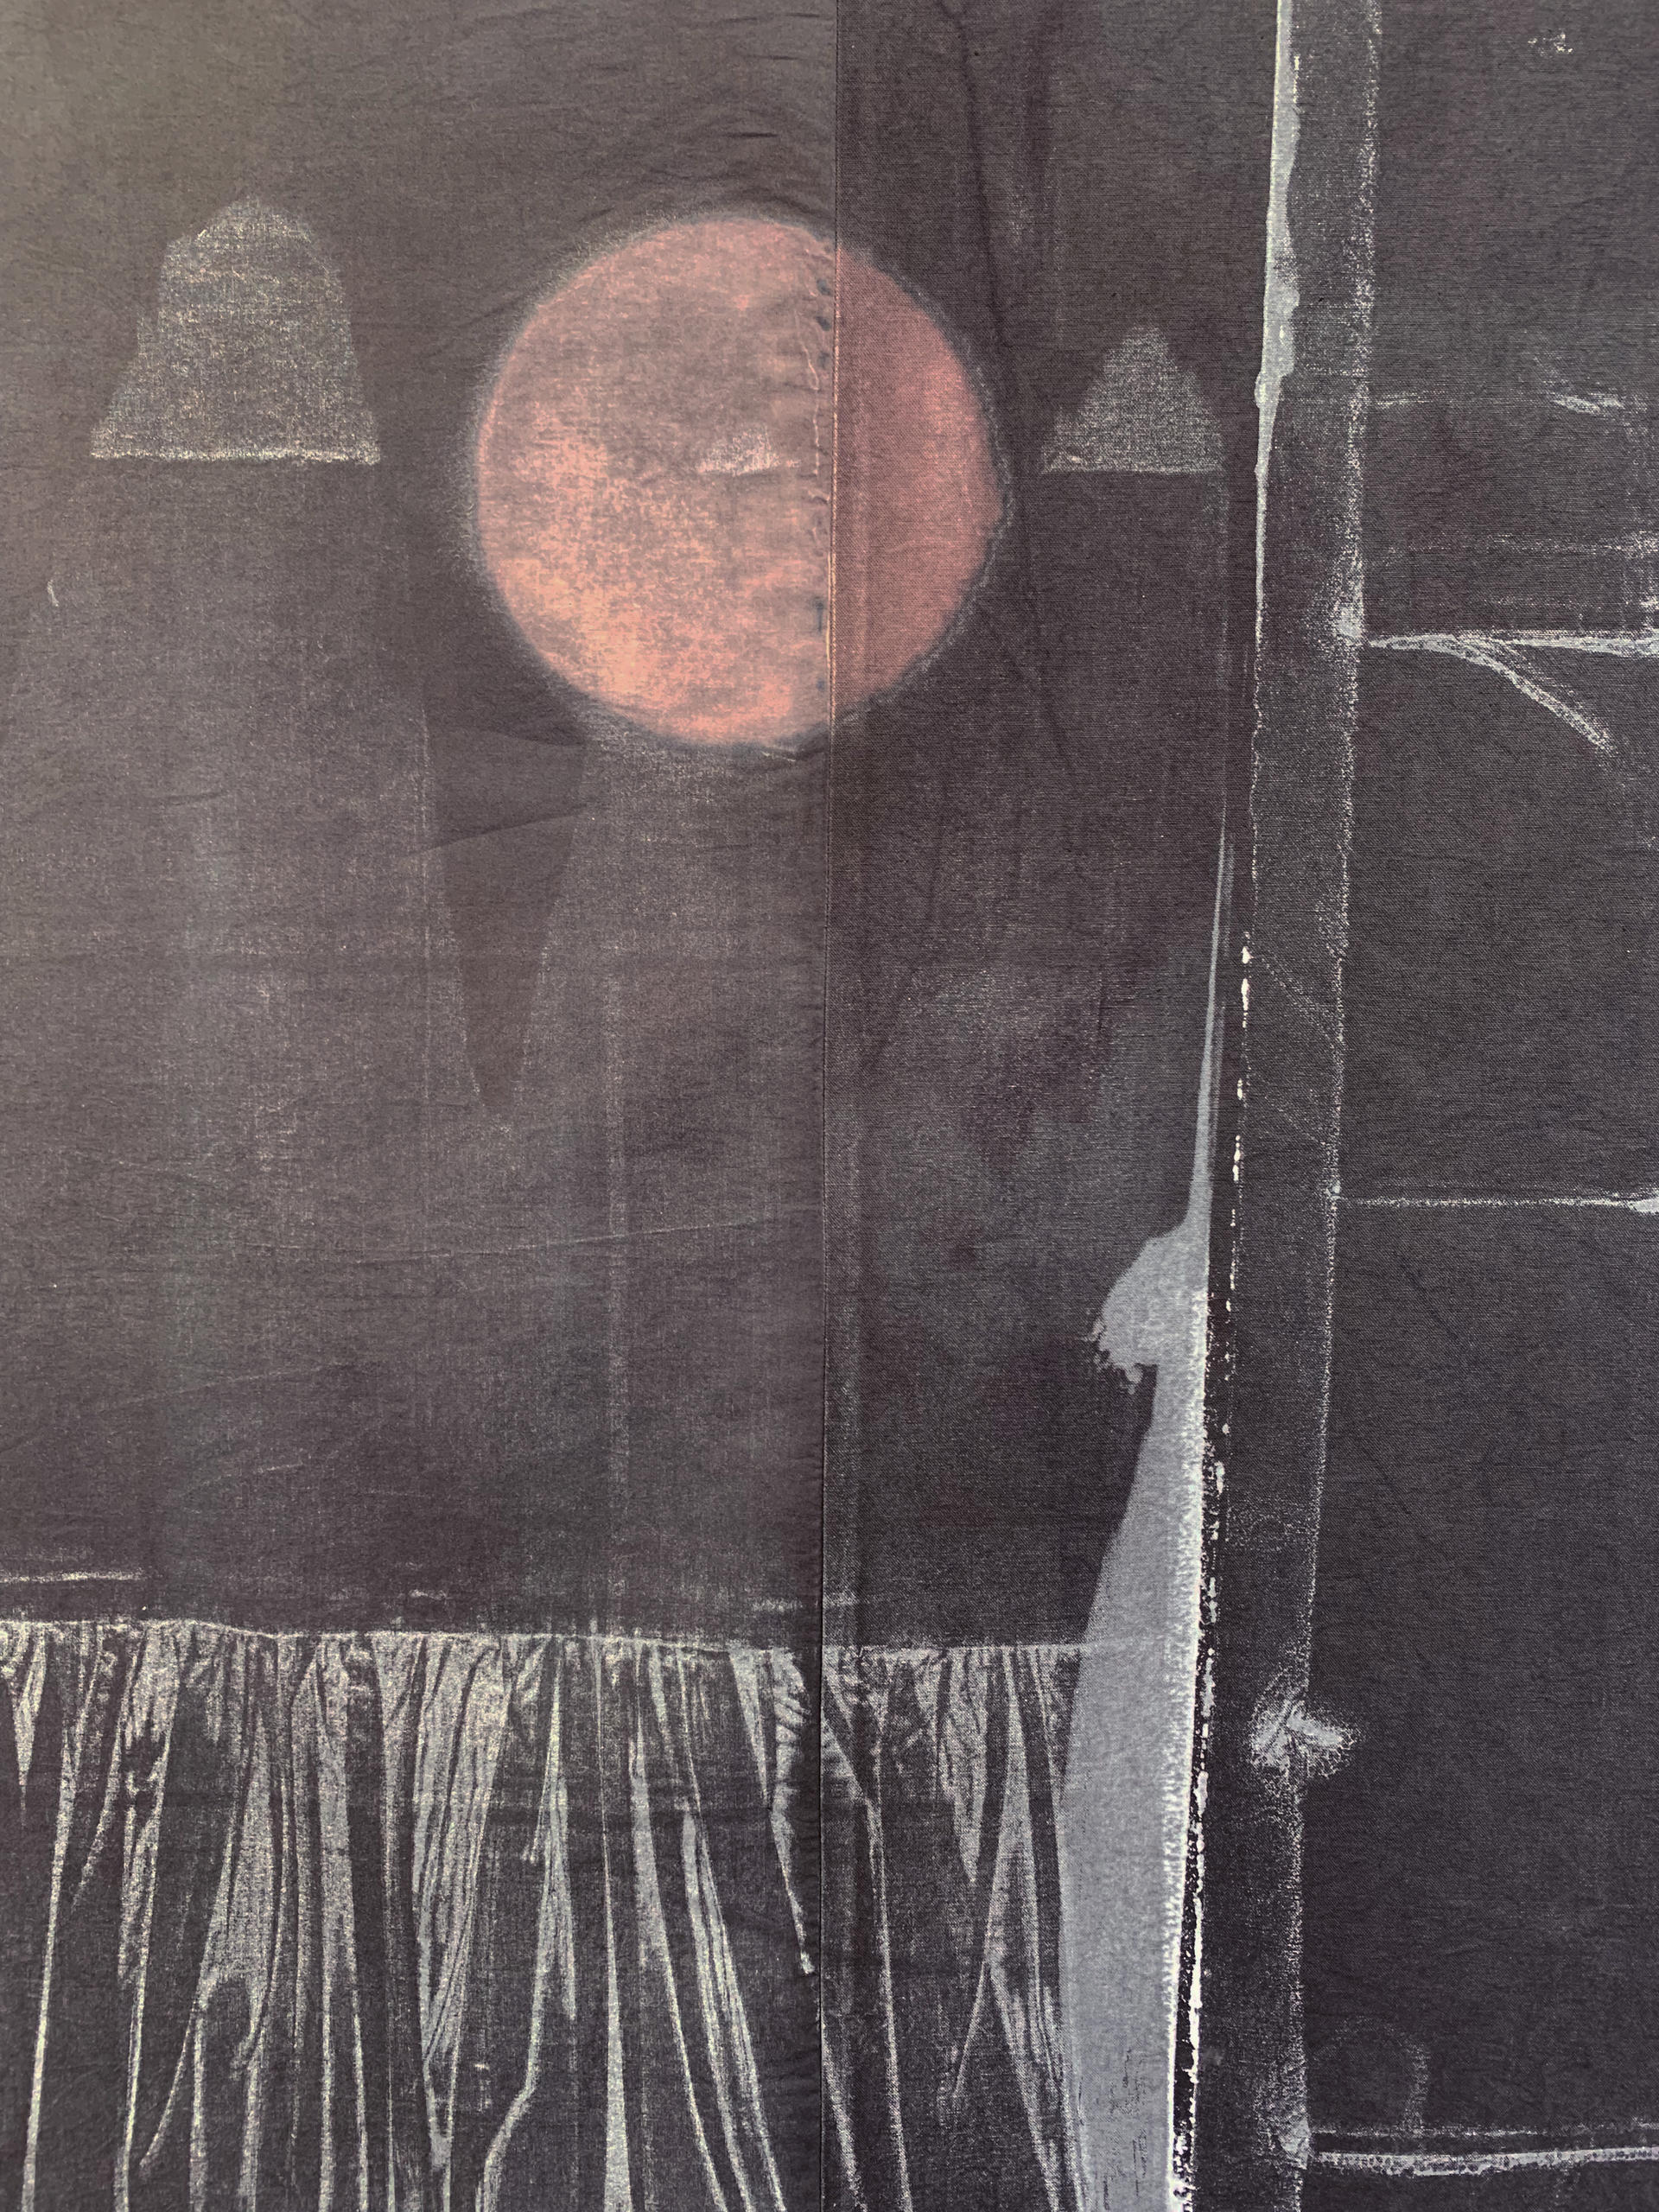 a black fabric printed with seams, curtains, and eclipses